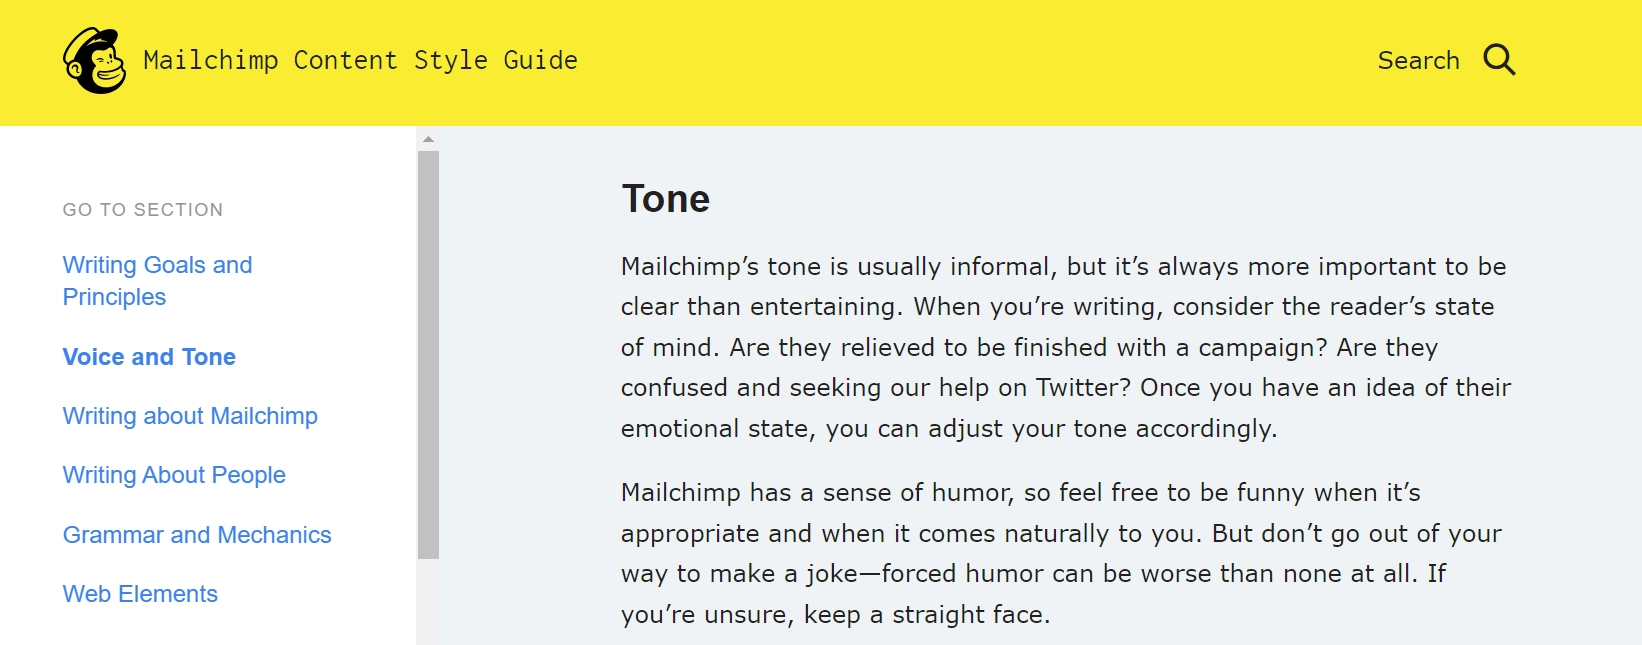 Mailchimp content style guide defining tone of voice